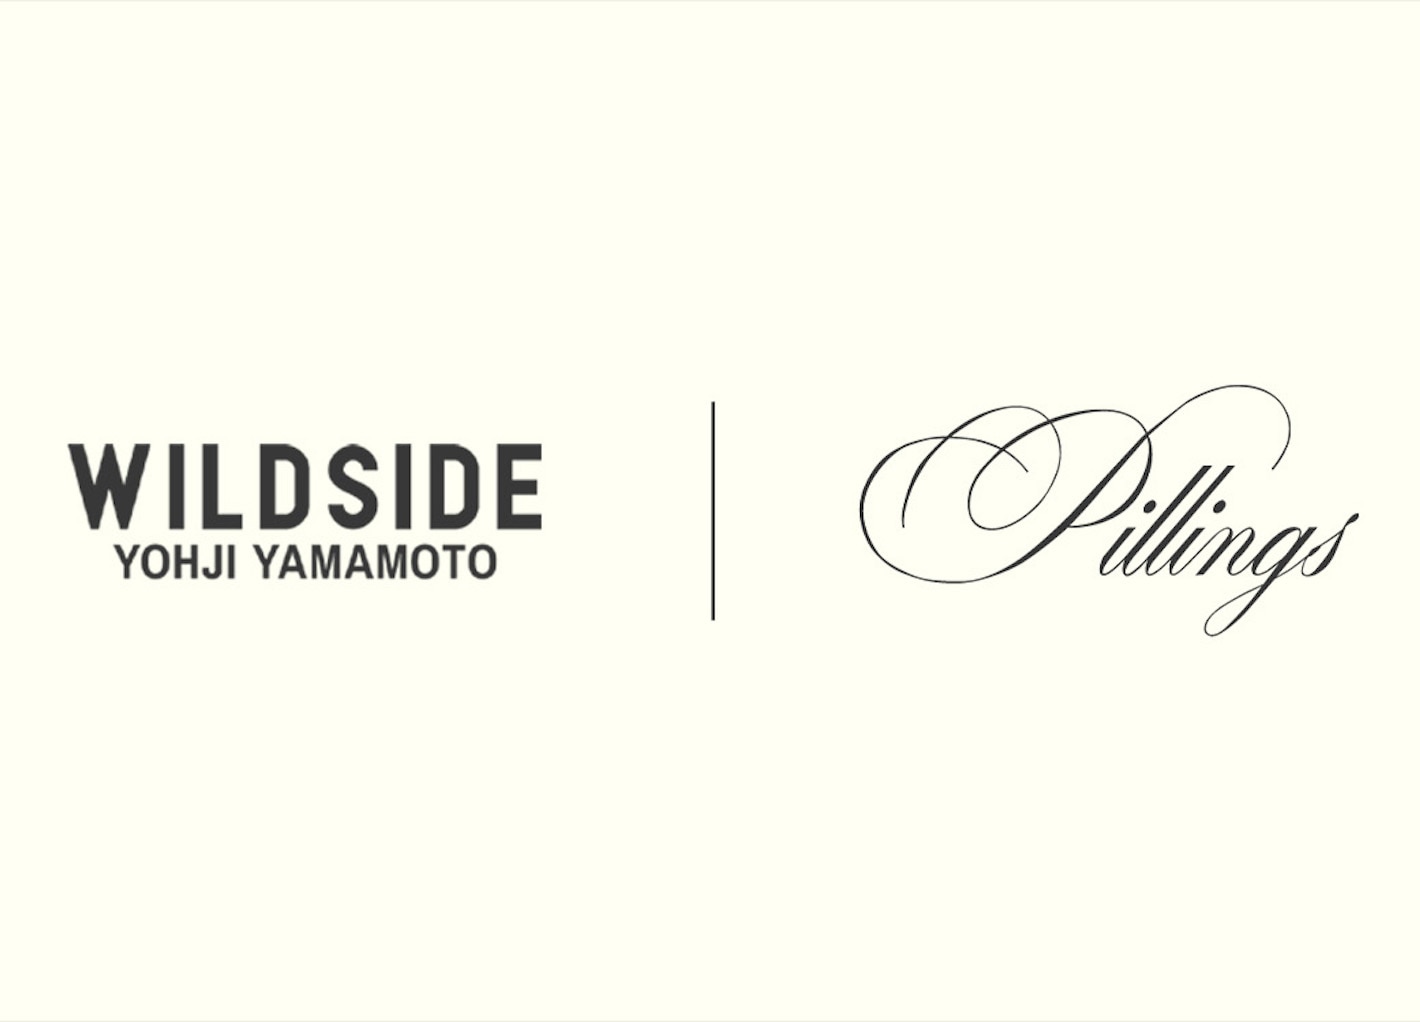 WILDSIDE×pillings Collaboration Collection